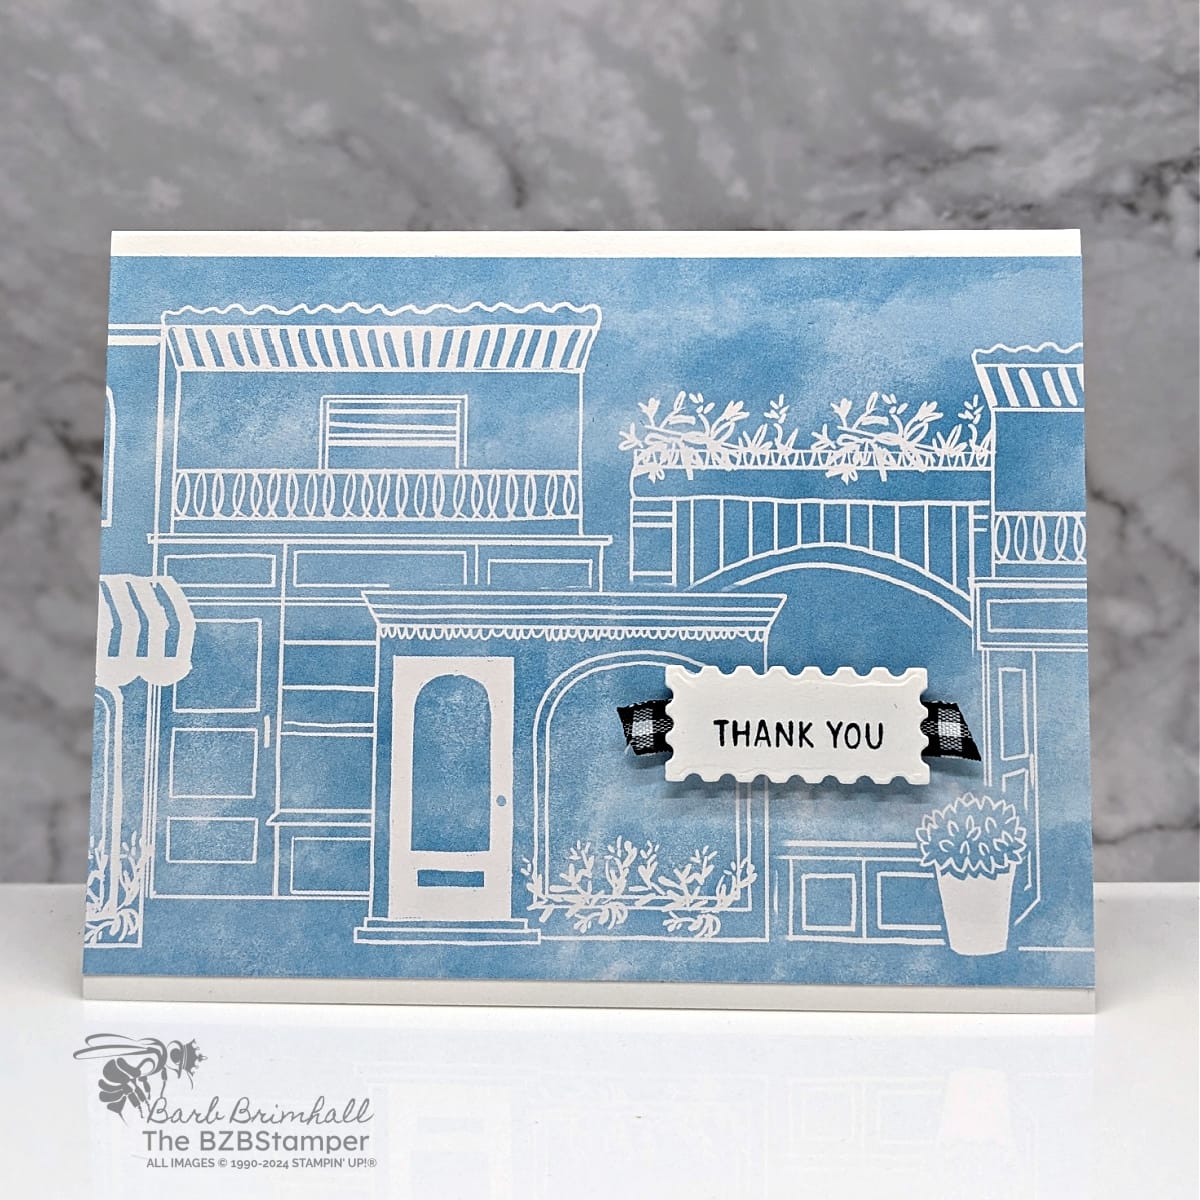 Thank You Card using the Les Shoppes Designer Paper